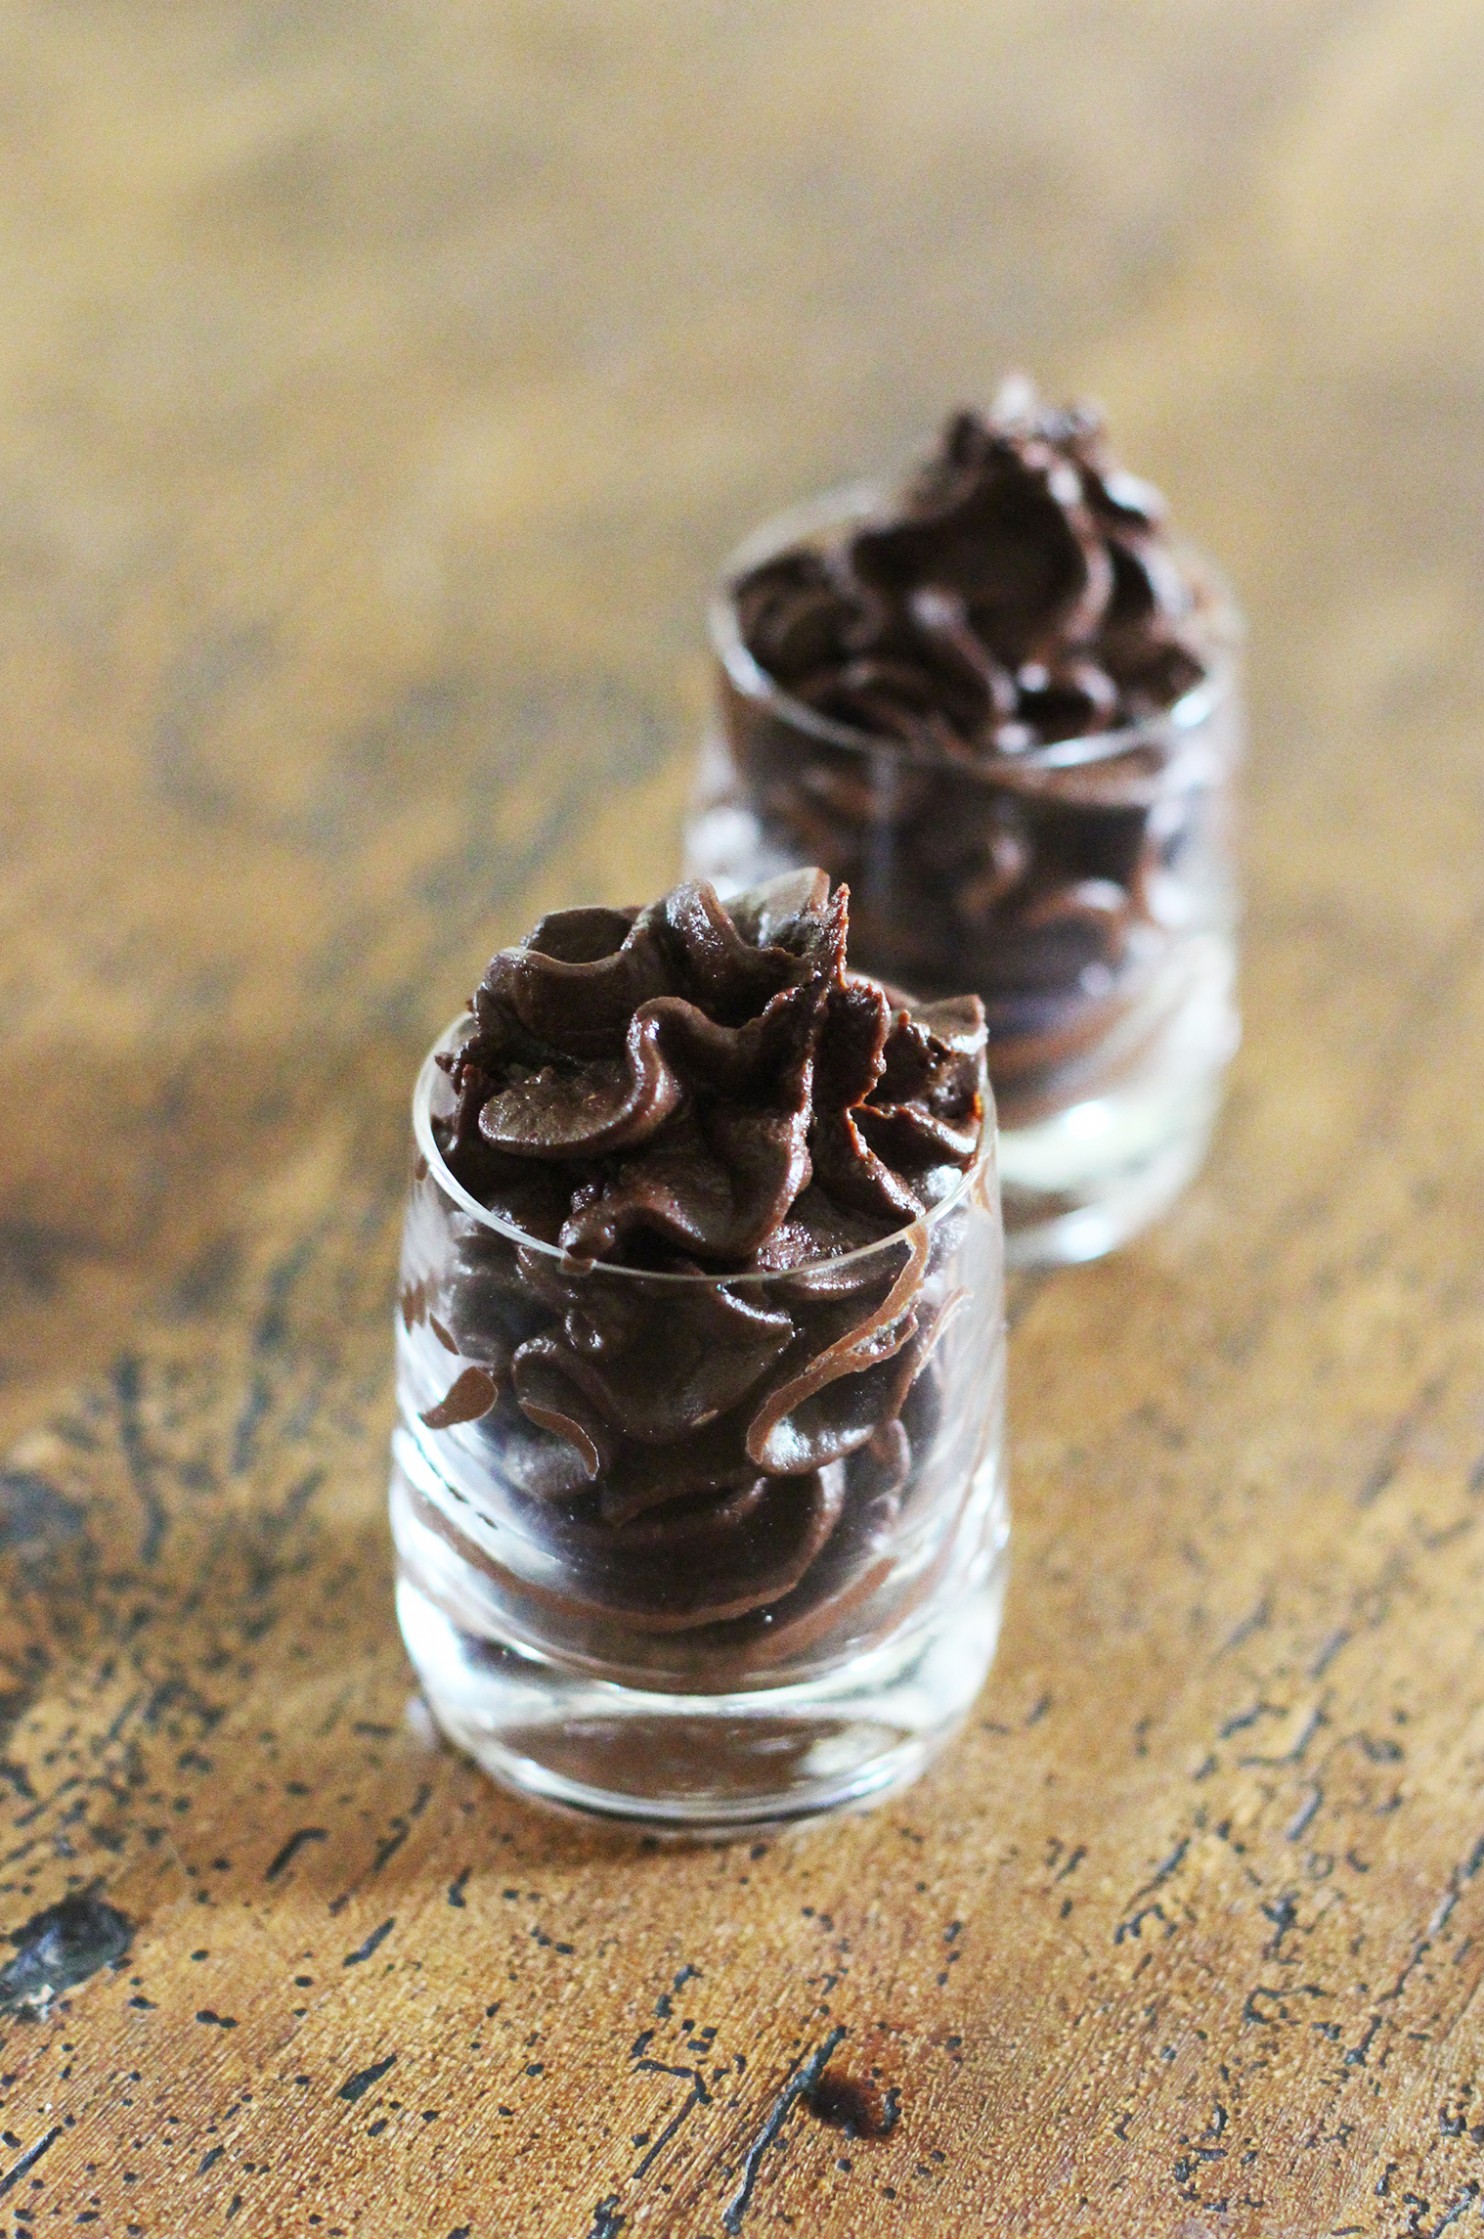 RAW CHOCOLATE MOUSSE